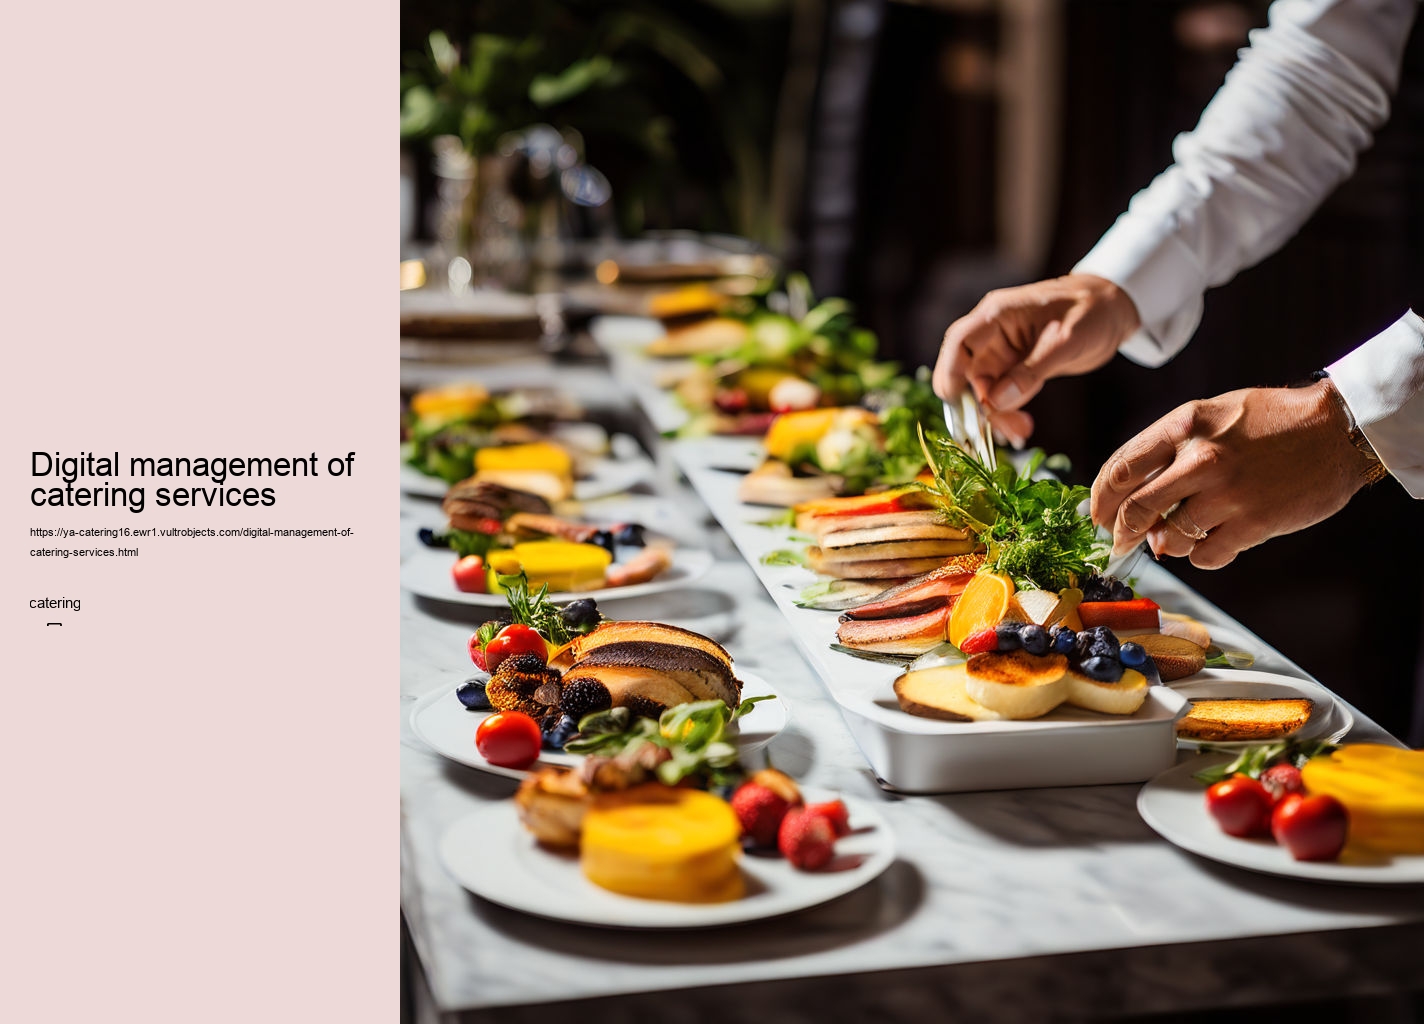 Digital management of catering services